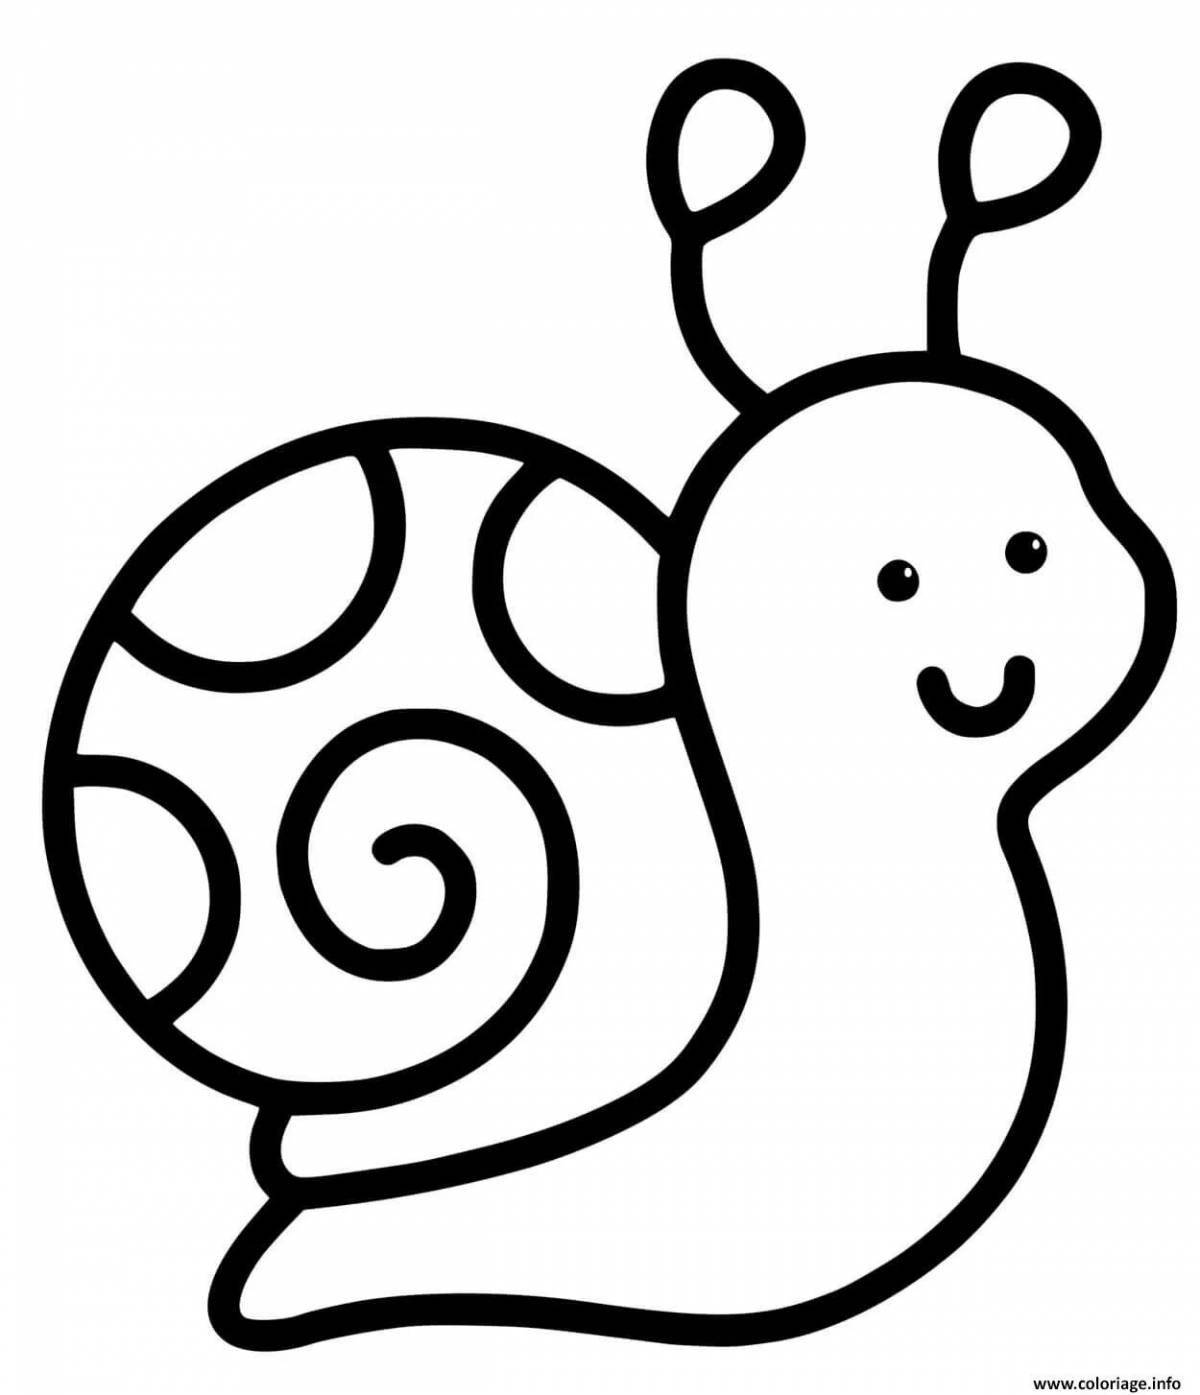 Snail coloring book for preschoolers